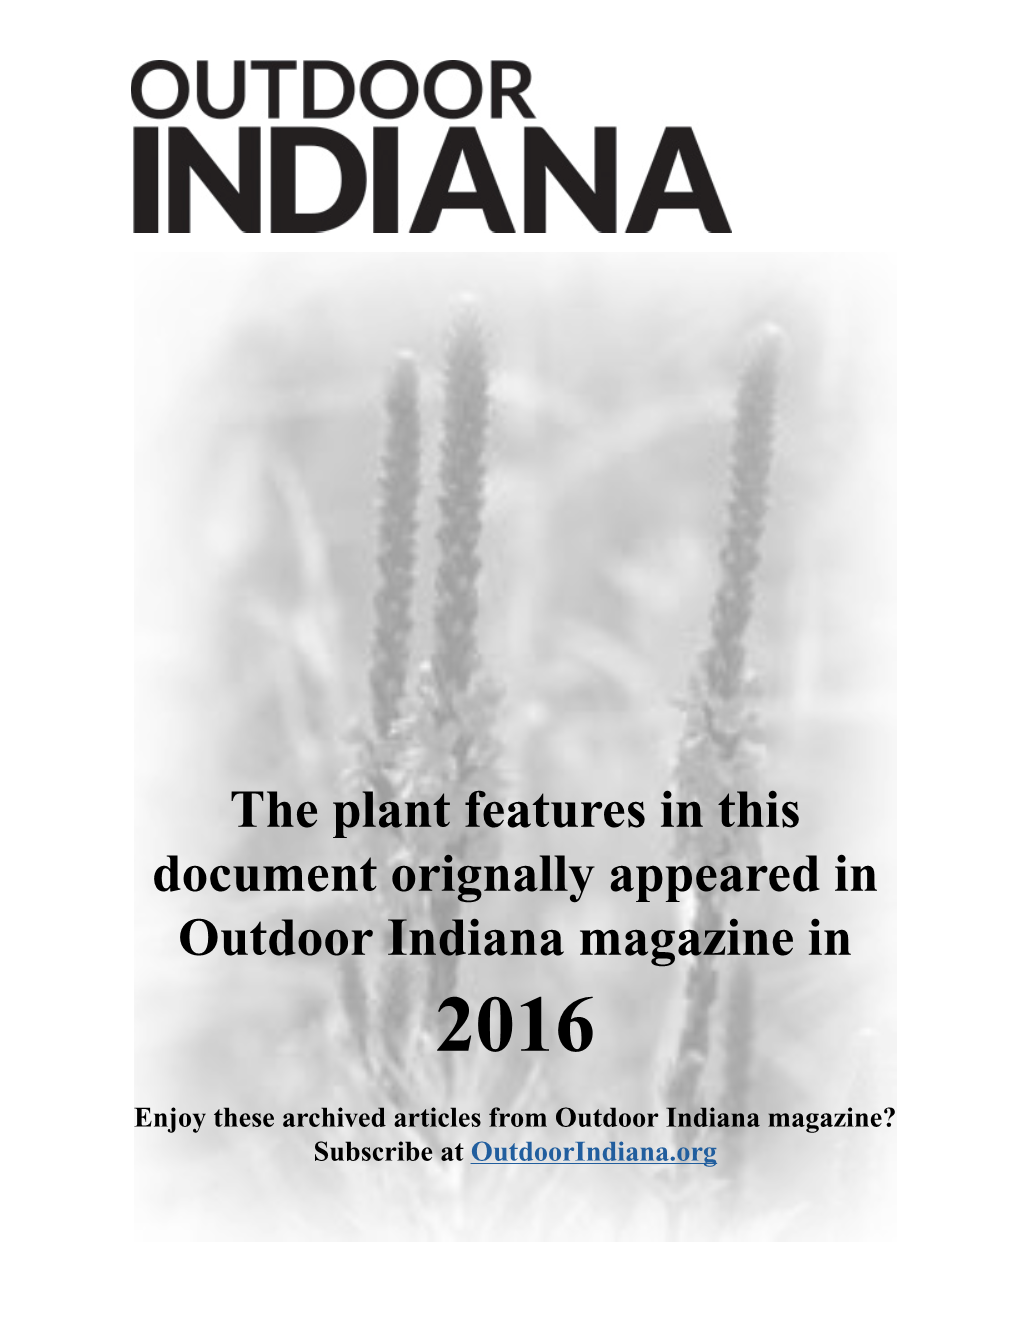 Outdoor Indiana Plant Features for 2016